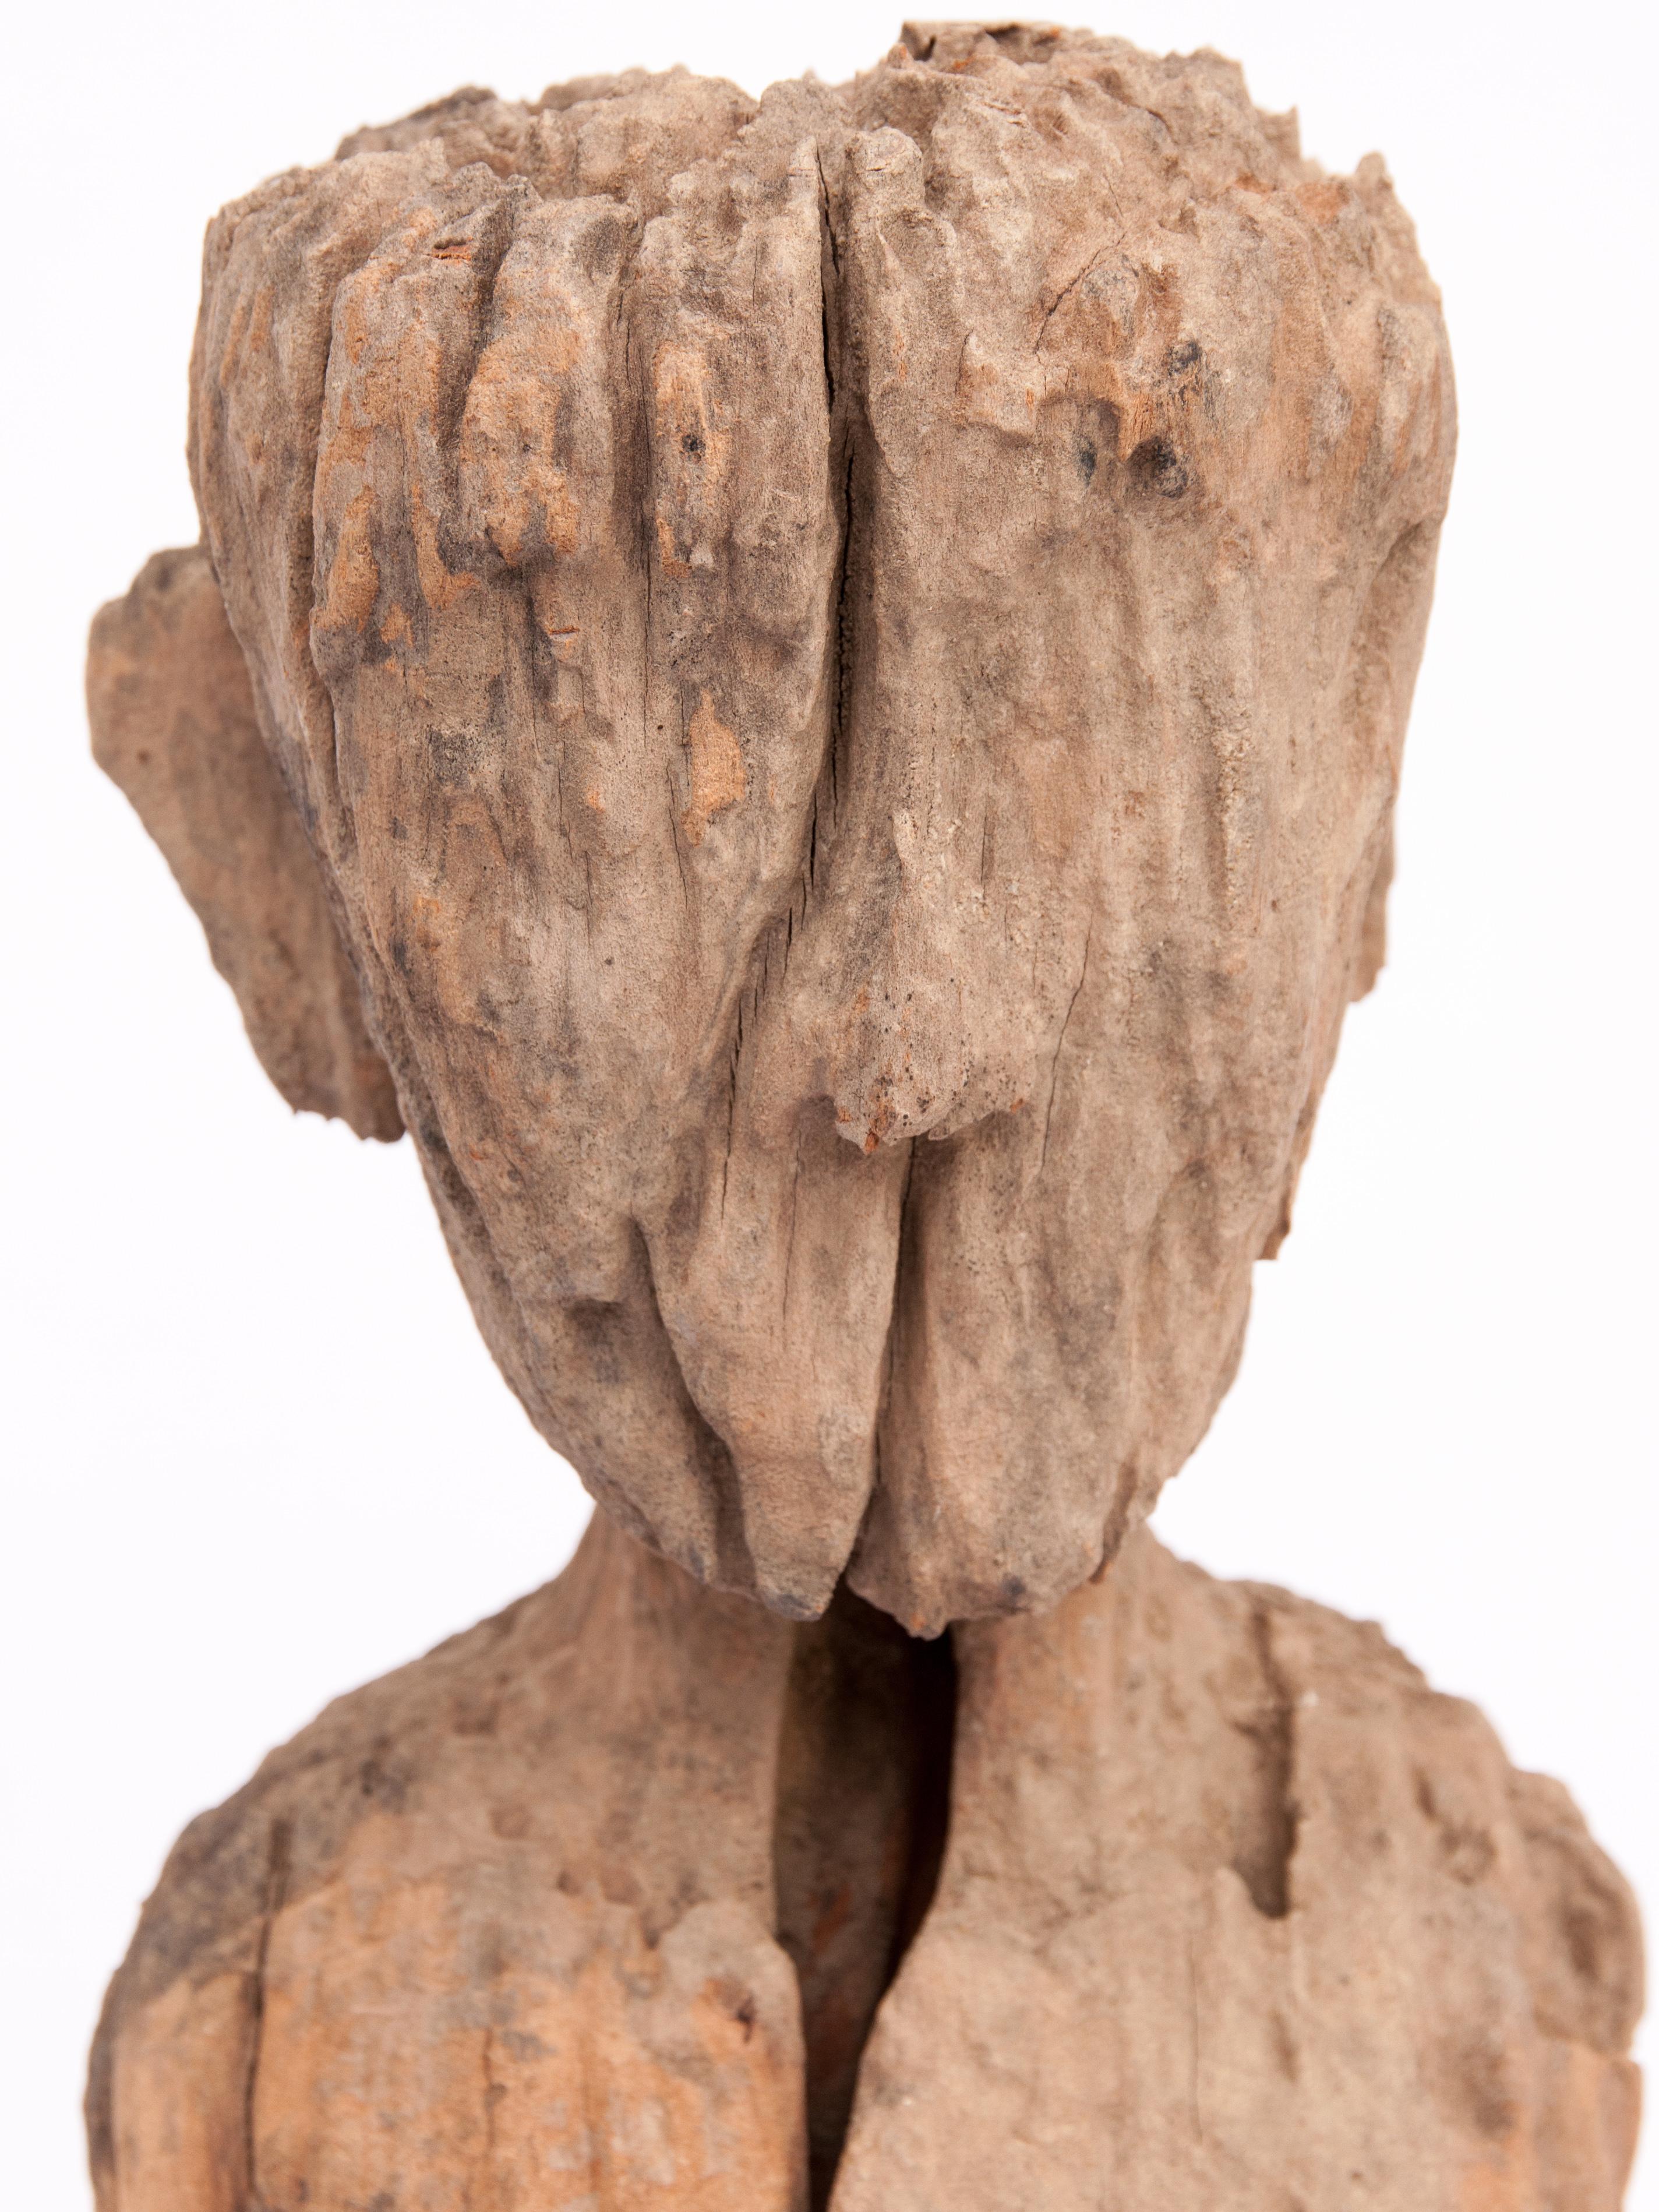 Old carved wooden figure from South or Southwest China, early 20th century. Mounted on a metal stand.
The specific origin or cultural context of this wonderfully eroded piece is unknown. It originates from south or southwest China, a vast area home